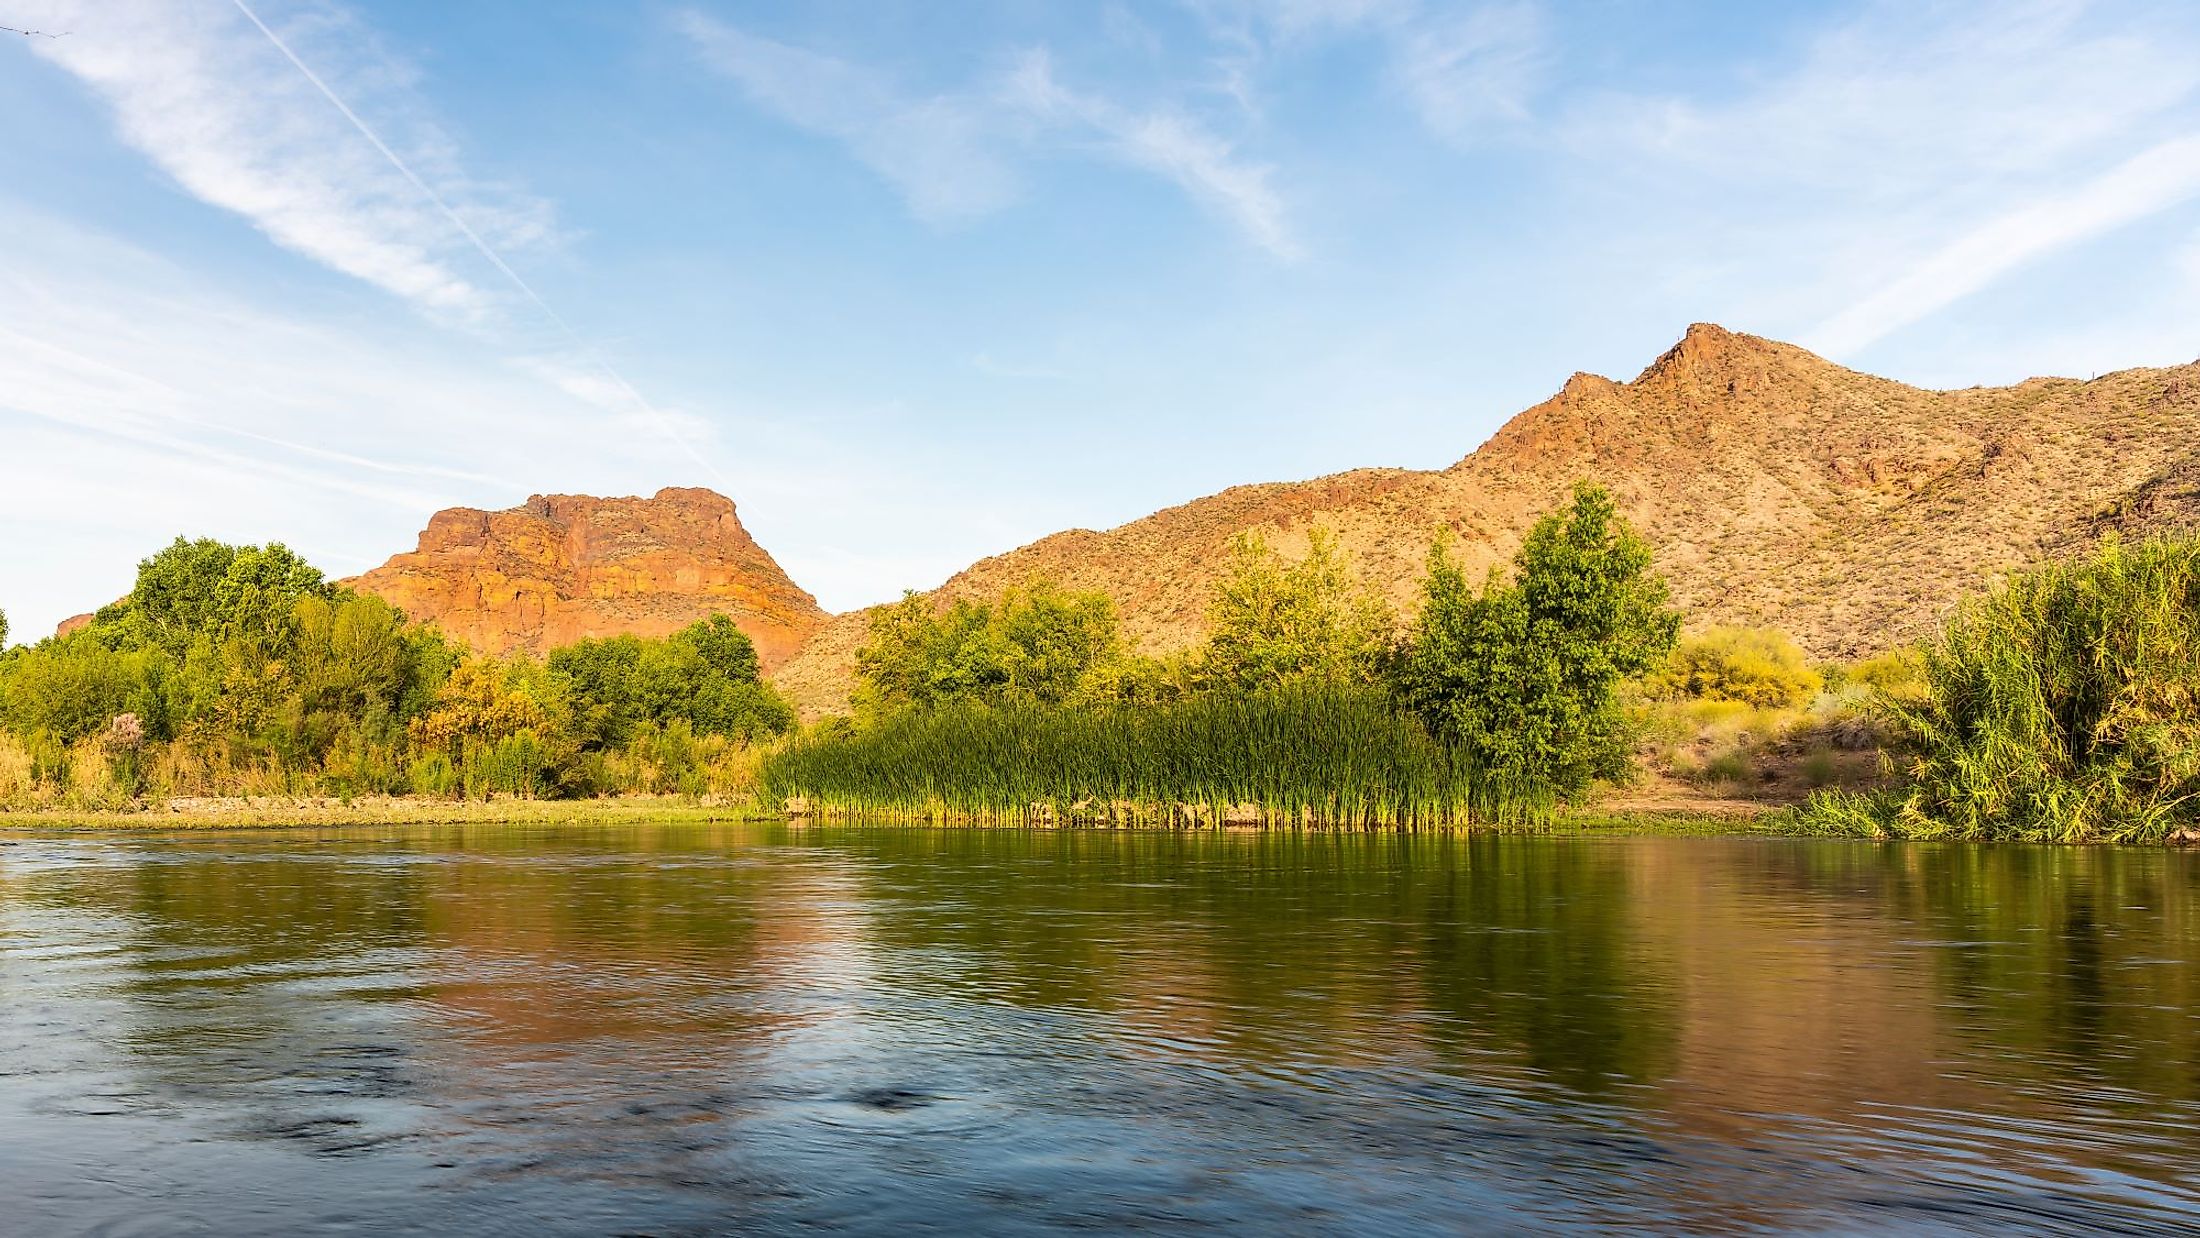 Landscape photograph of the Salt River in the Tonto National Forest in Arizona.